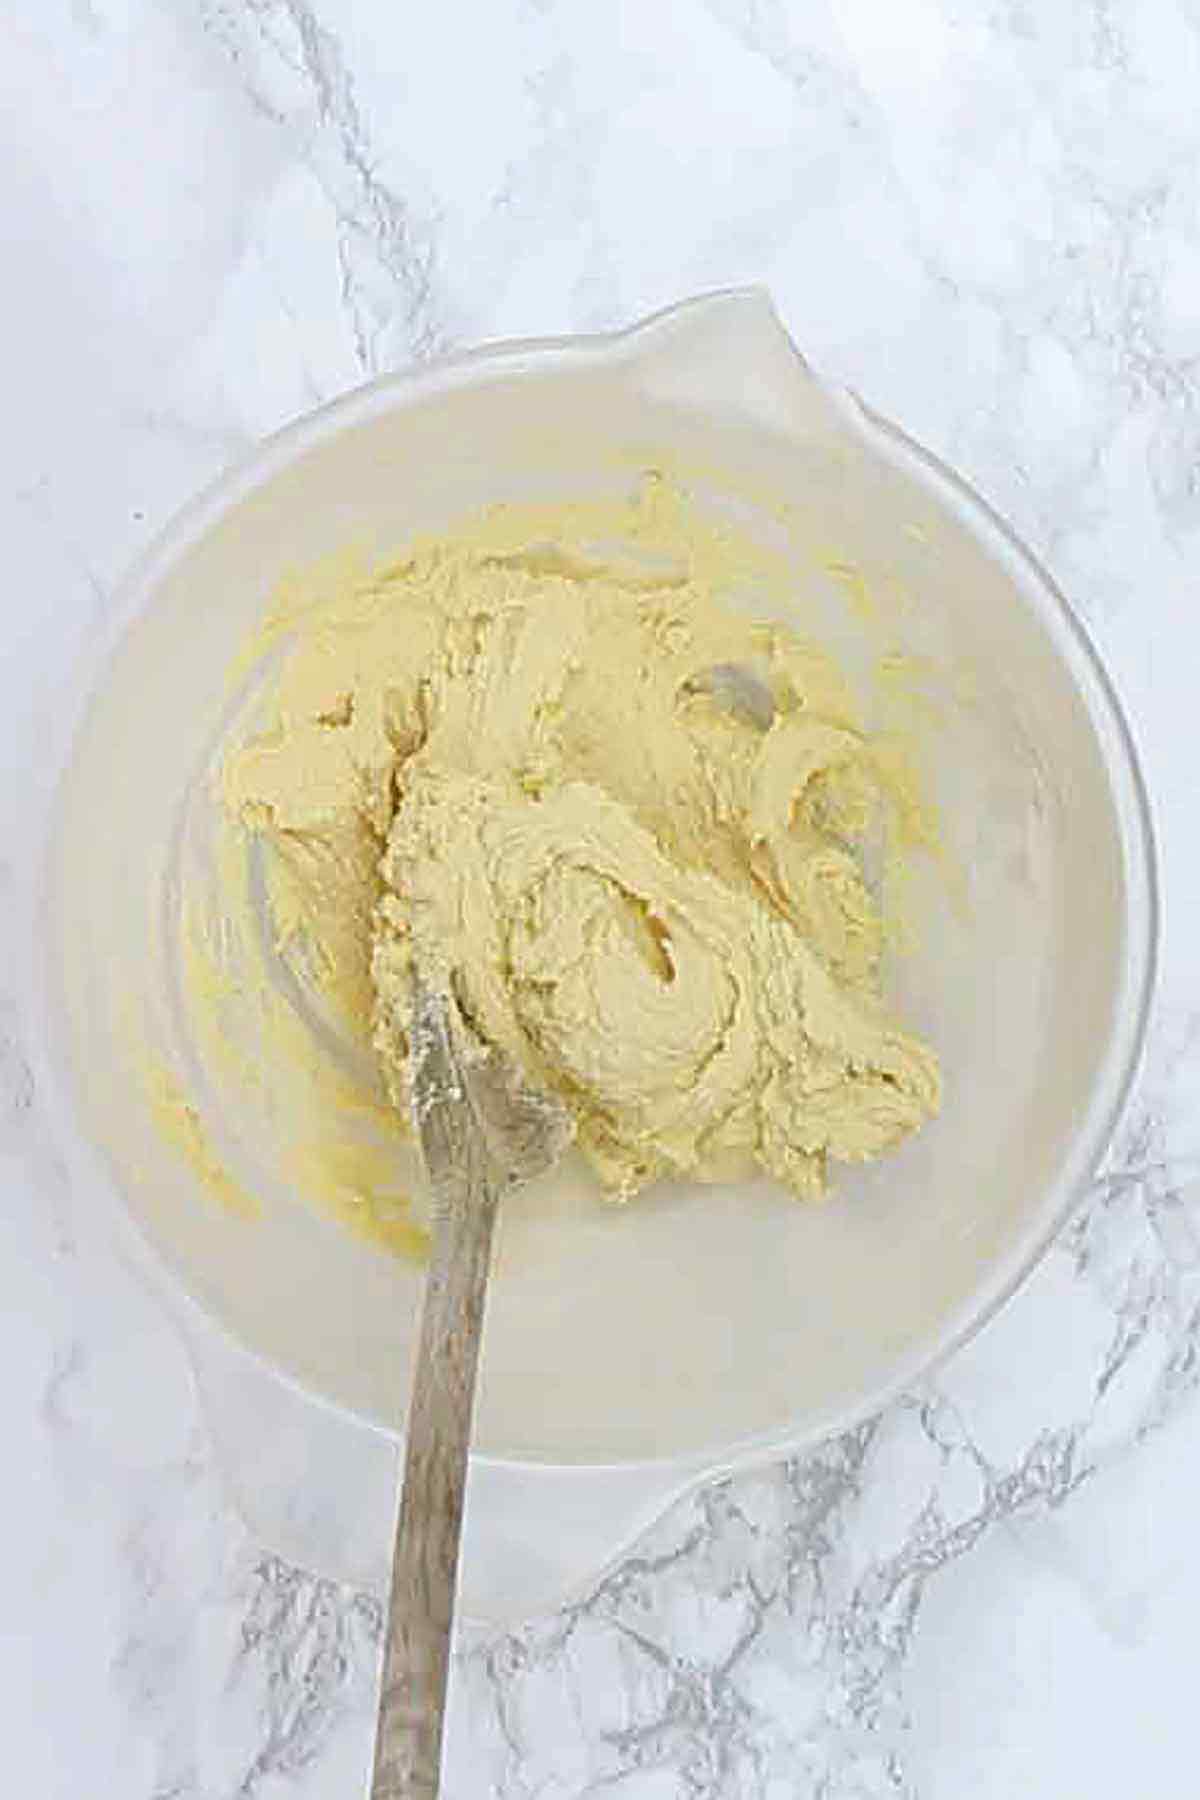 Margarine And Sugar Mixed Together In A Bowl